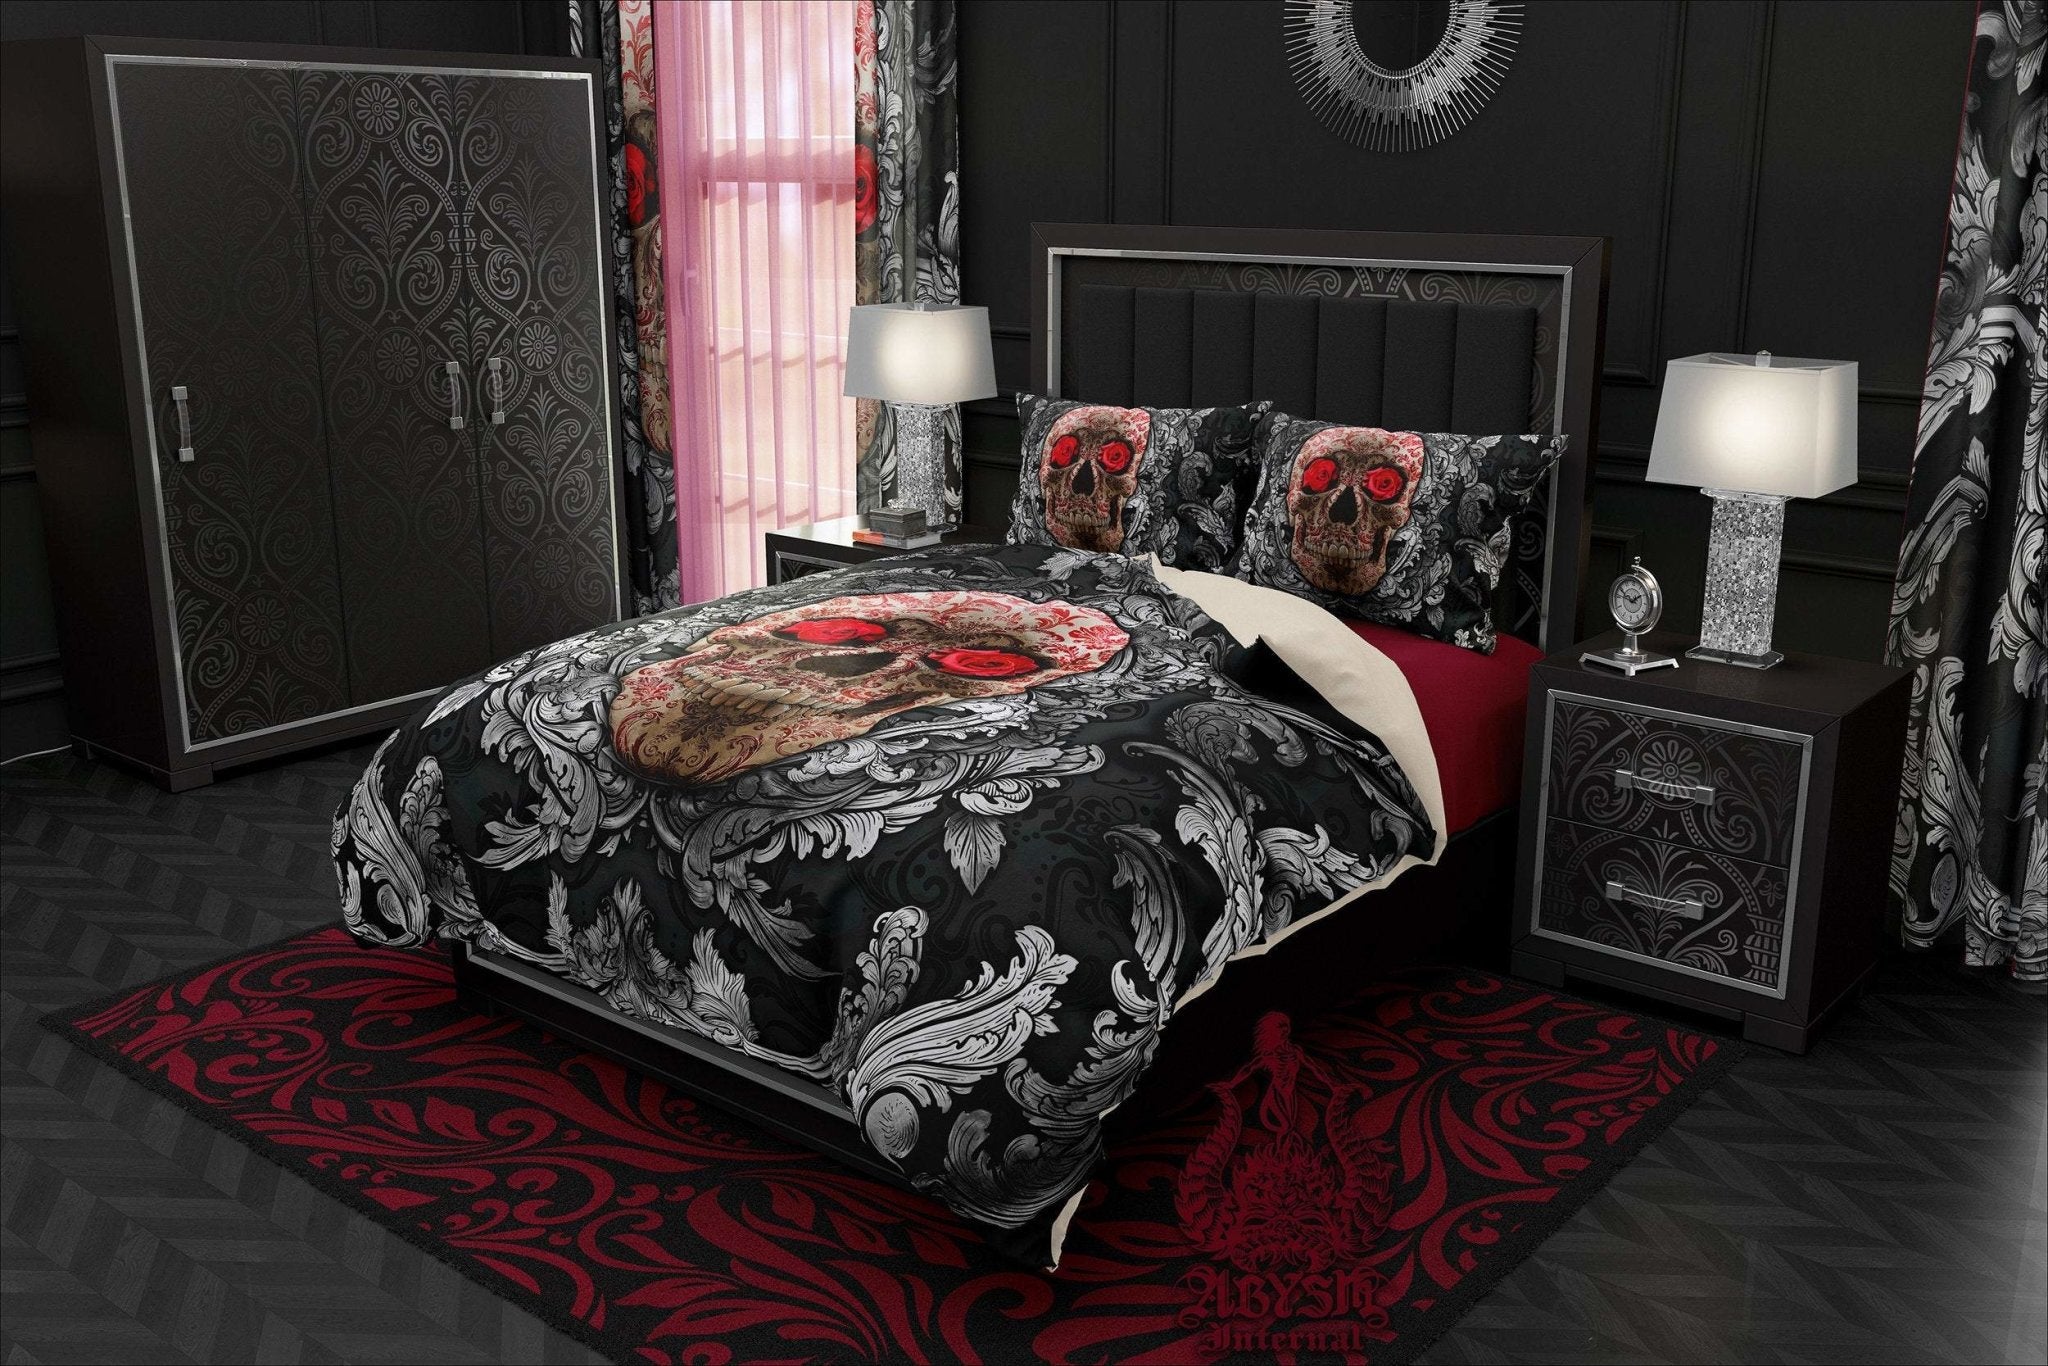 Skull Bedding Set, Comforter and Duvet, Goth Bed Cover and Bedroom Decor, King, Queen and Twin Size - Silver and Red - Abysm Internal